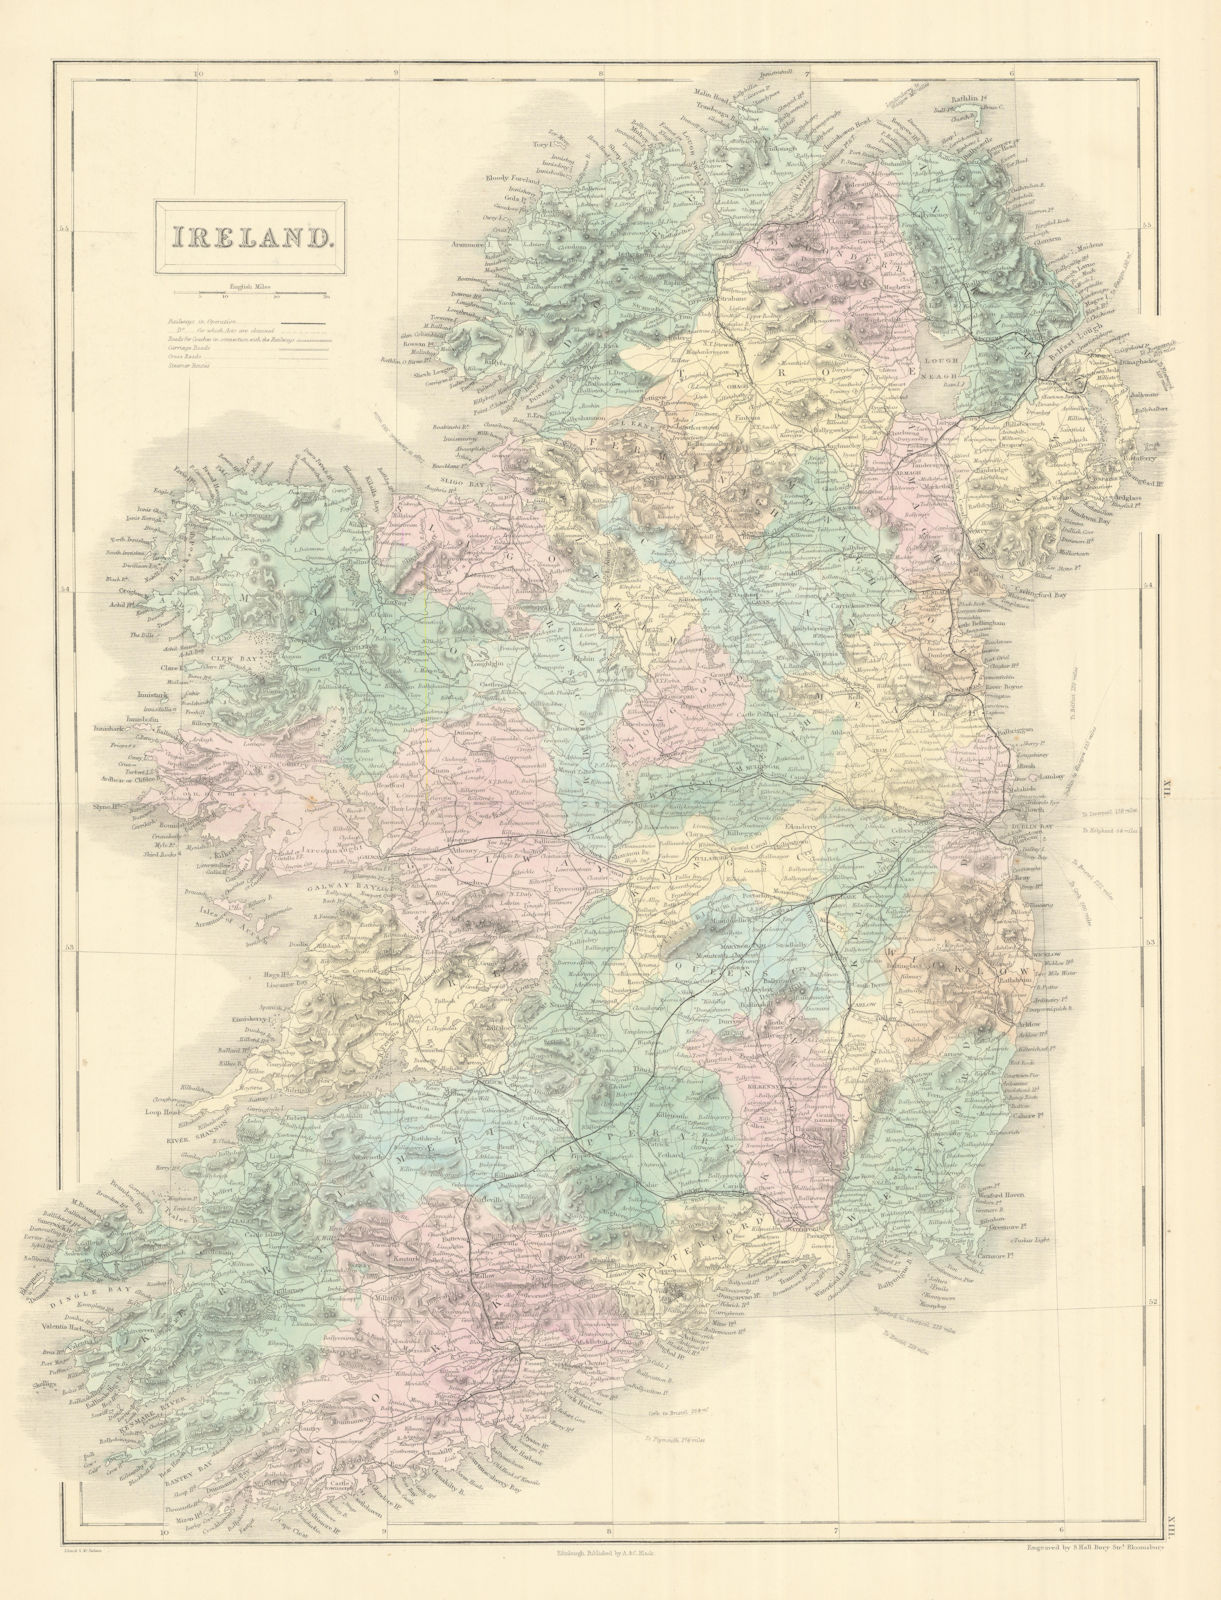 Associate Product Ireland showing counties & railways by SIDNEY HALL 1854 old antique map chart